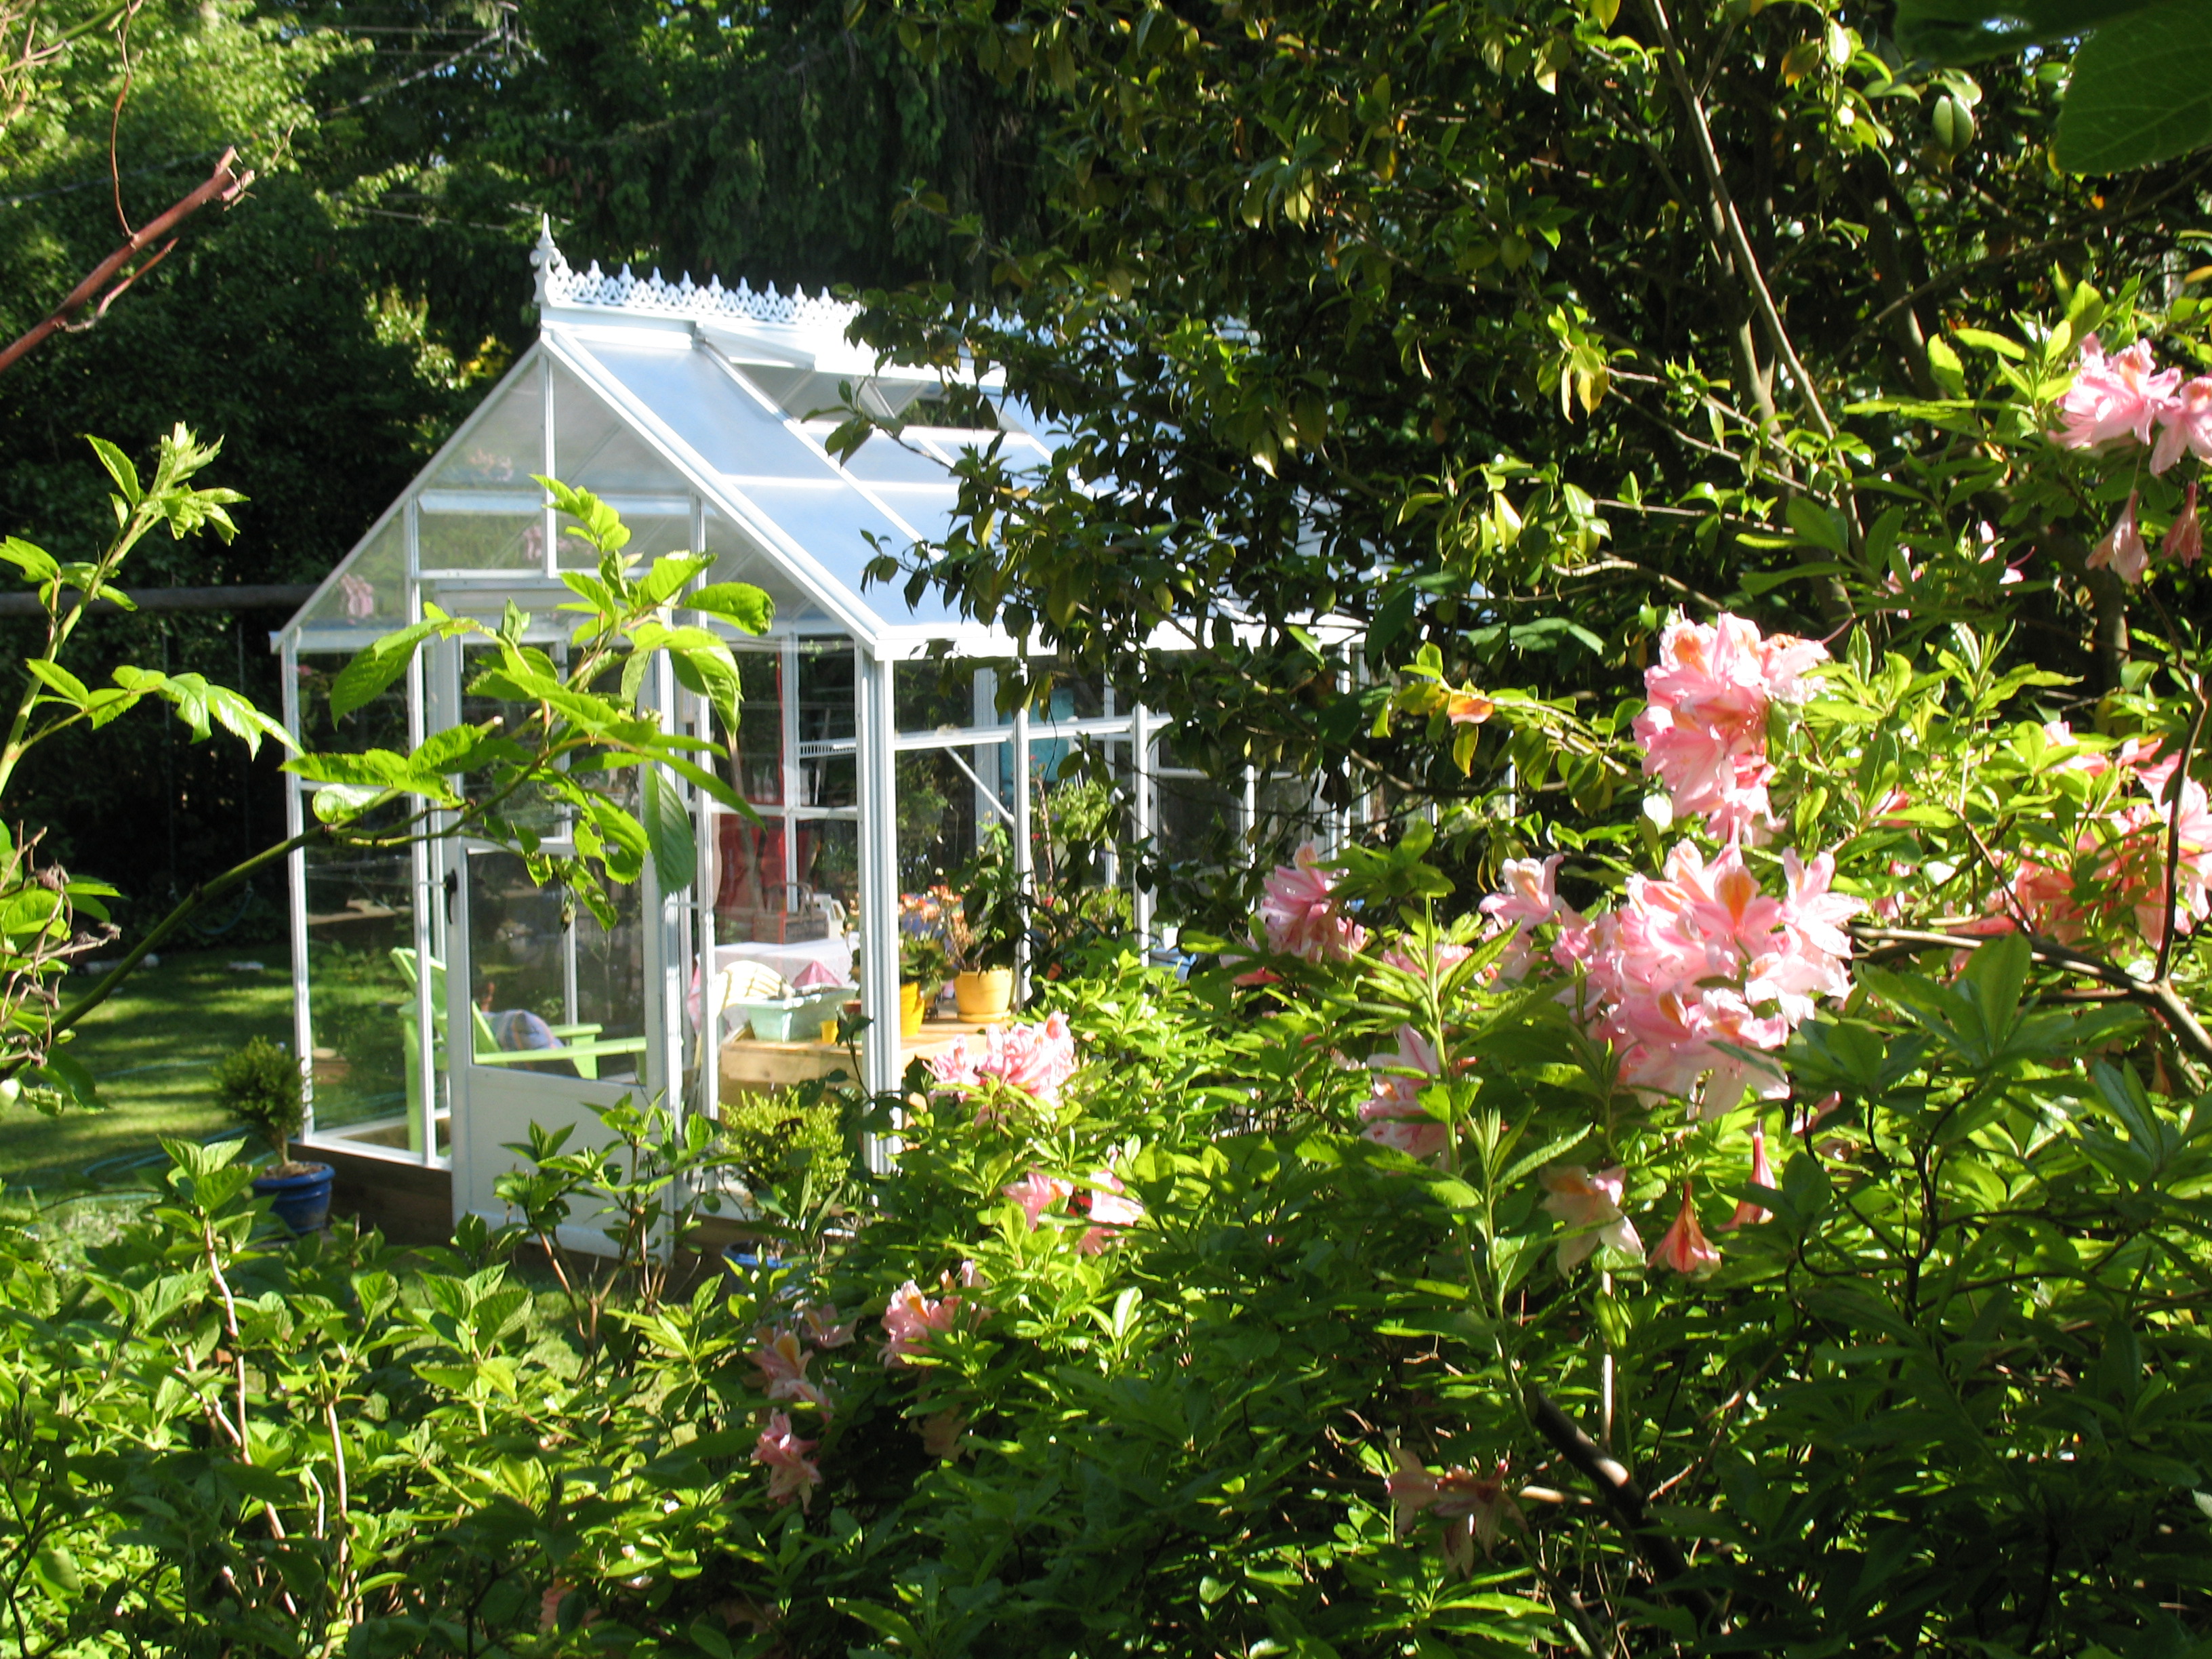 BC Greenhouse Cottage in White set in a garden